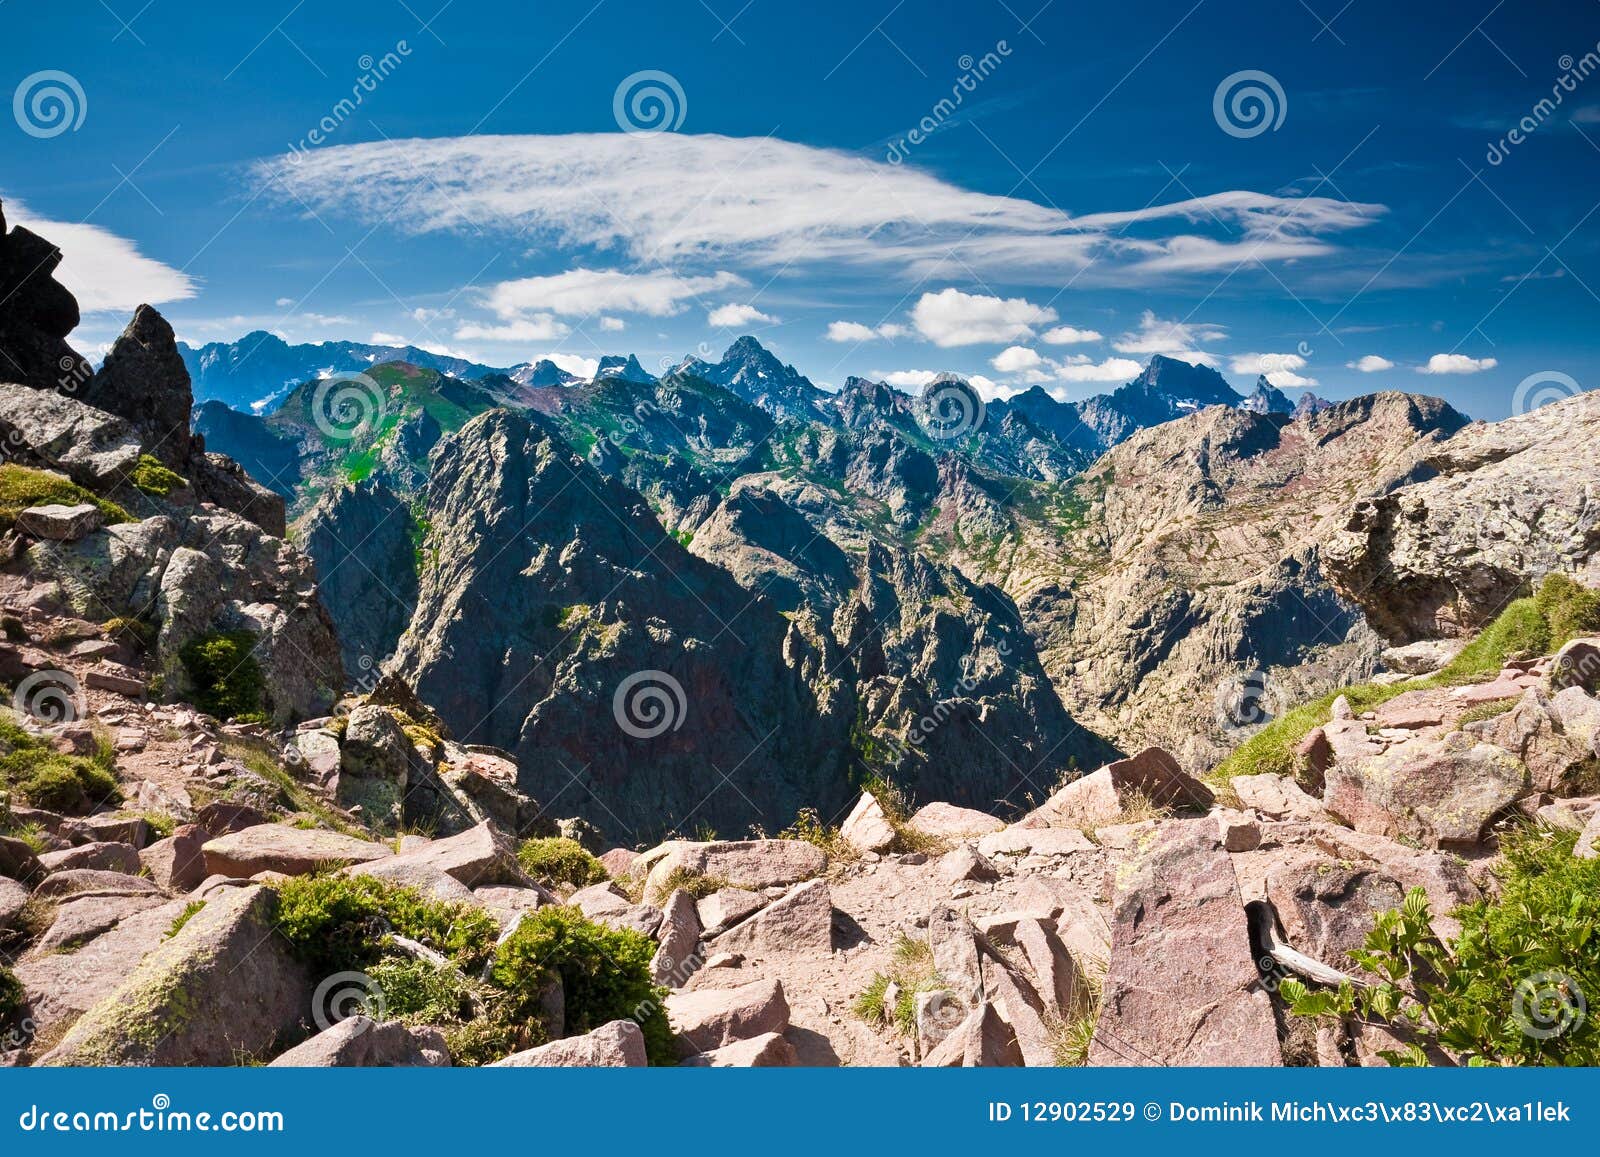 edgy peaks of corsican mountains